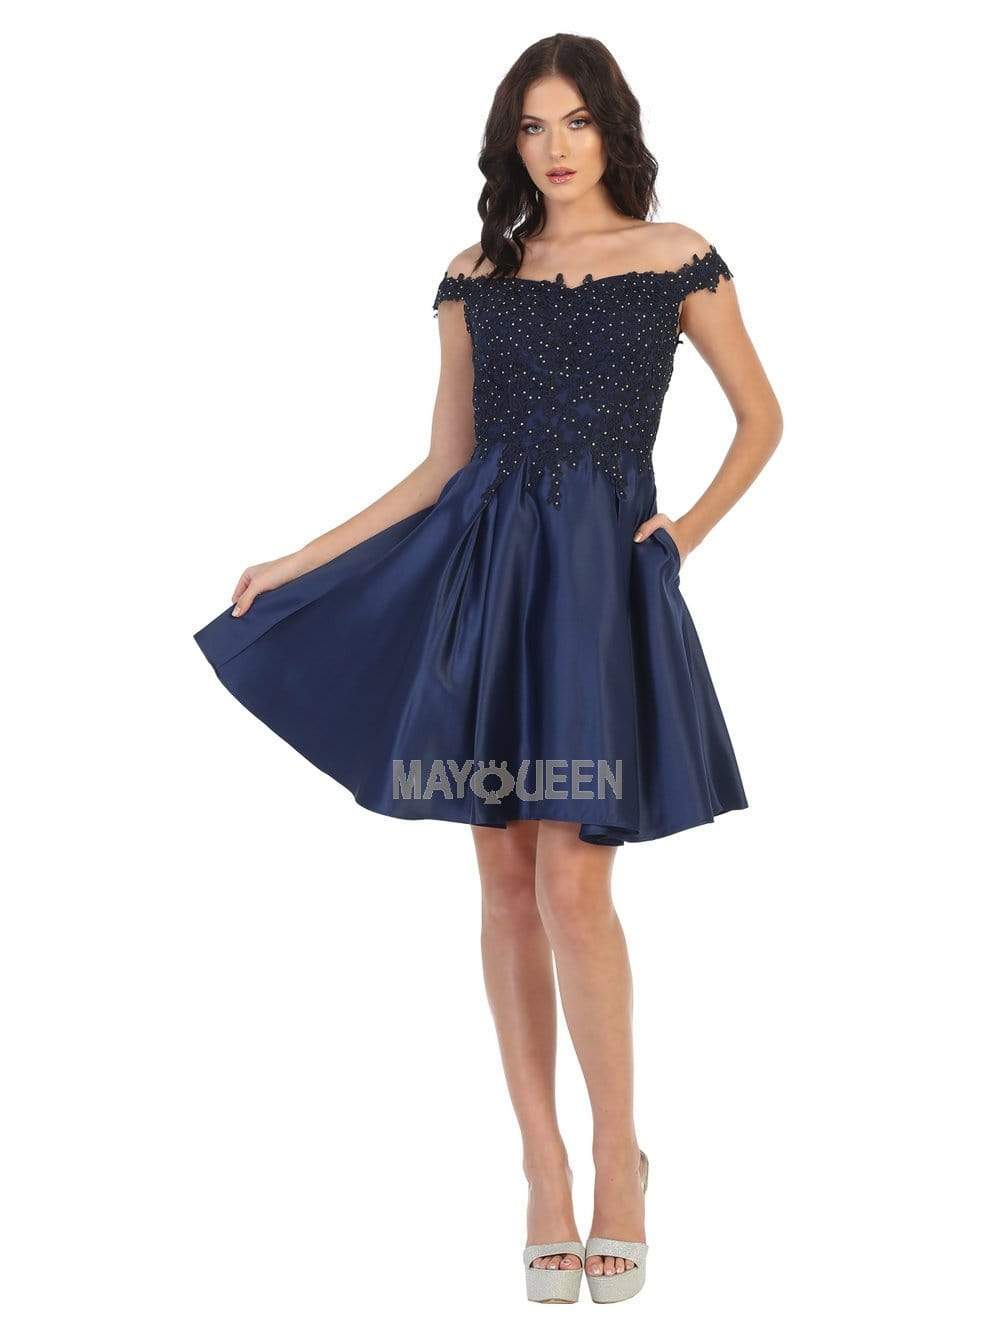 May Queen - MQ1766 Off Shoulder Beaded Lace Satin Cocktail Dress Homecoming Dresses 2 / Navy